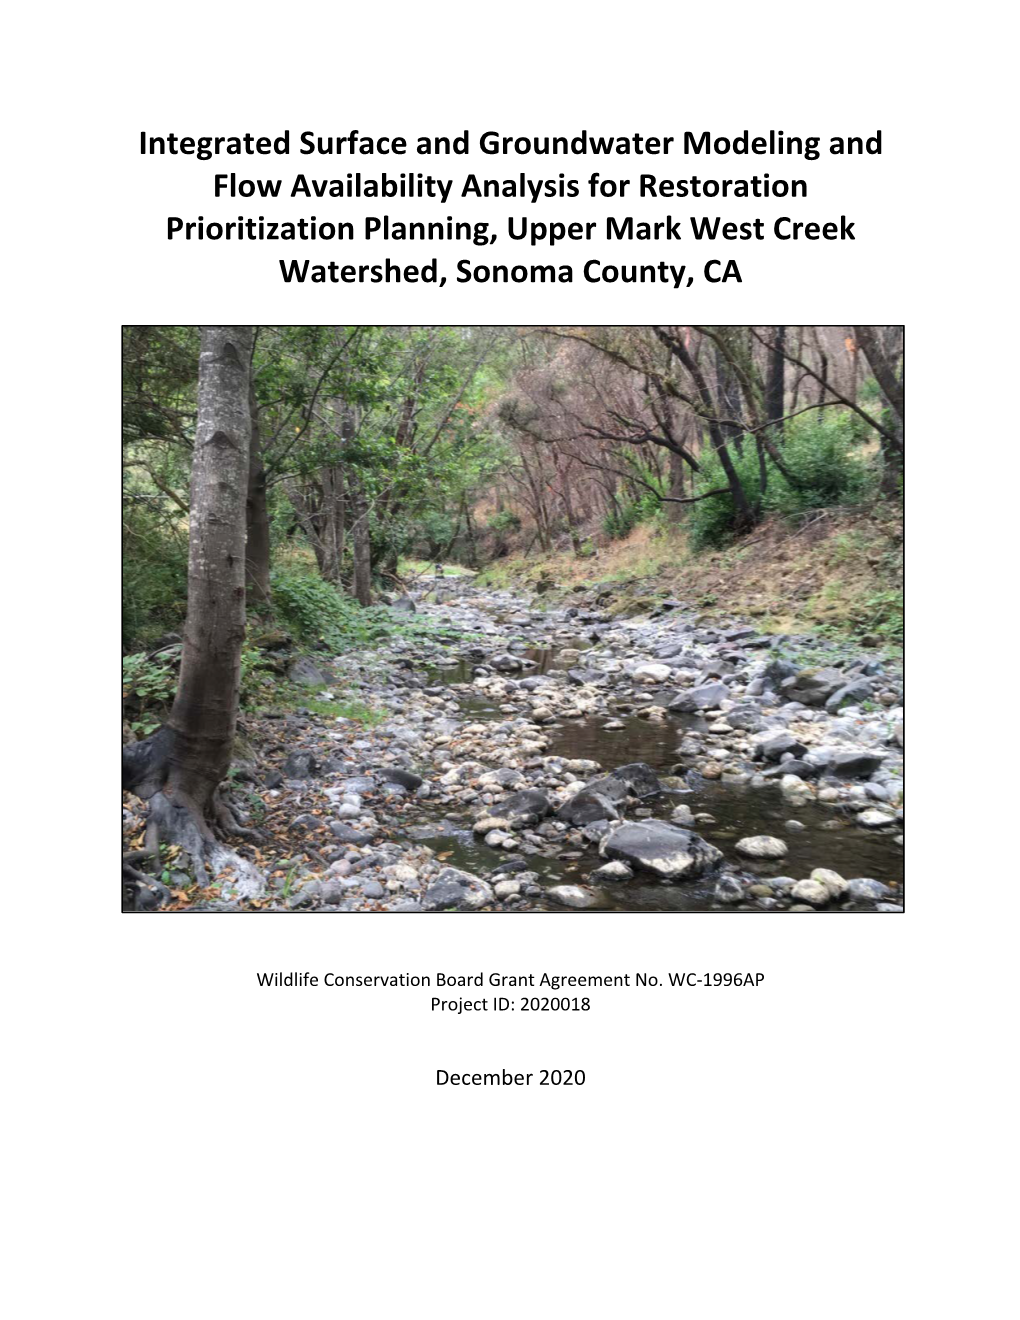 Integrated Surface and Groundwater Modeling and Flow Availability